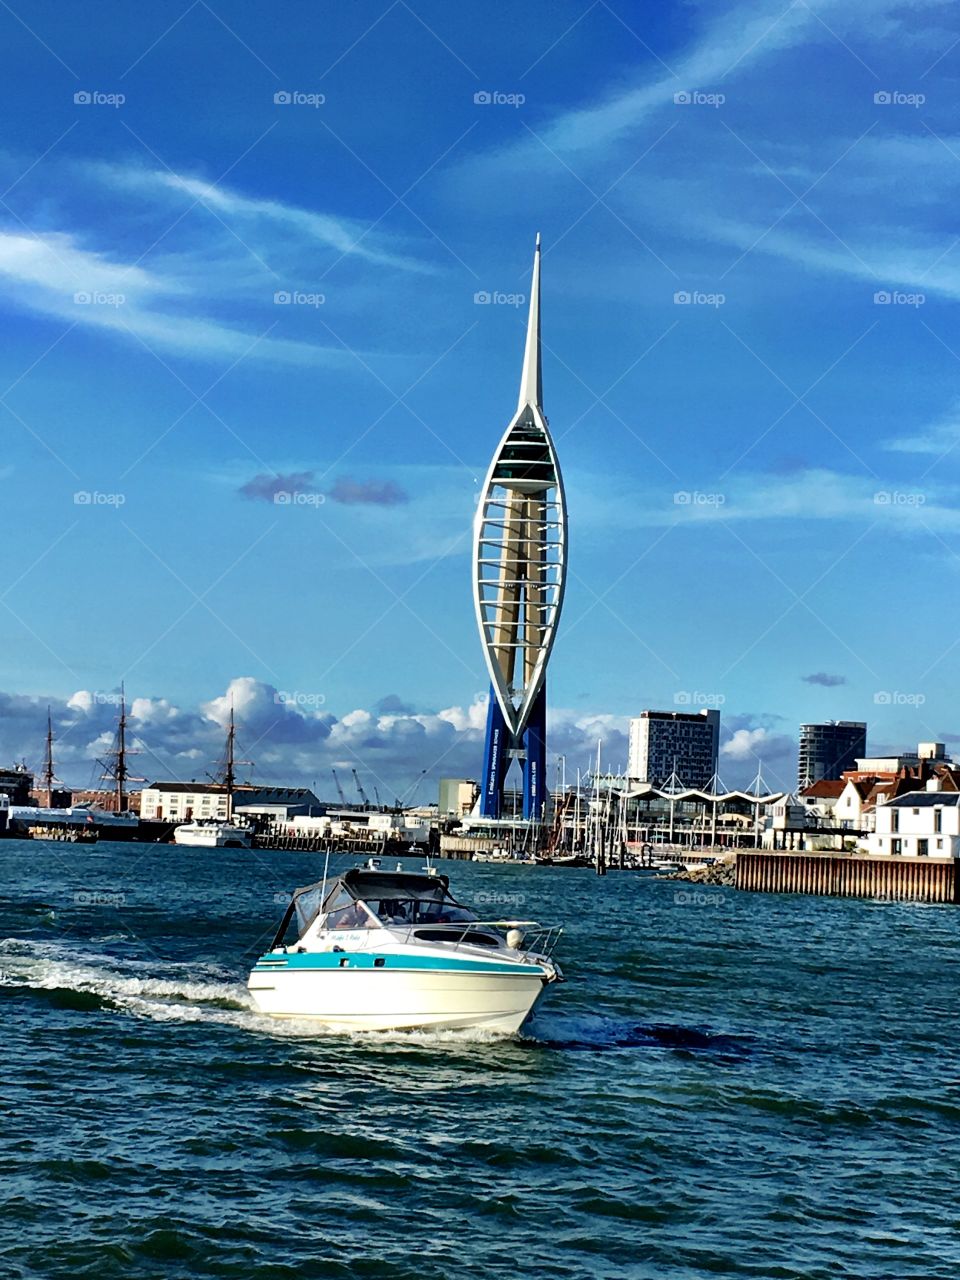 The Spinnaker Tower,  Portsmouth, England.